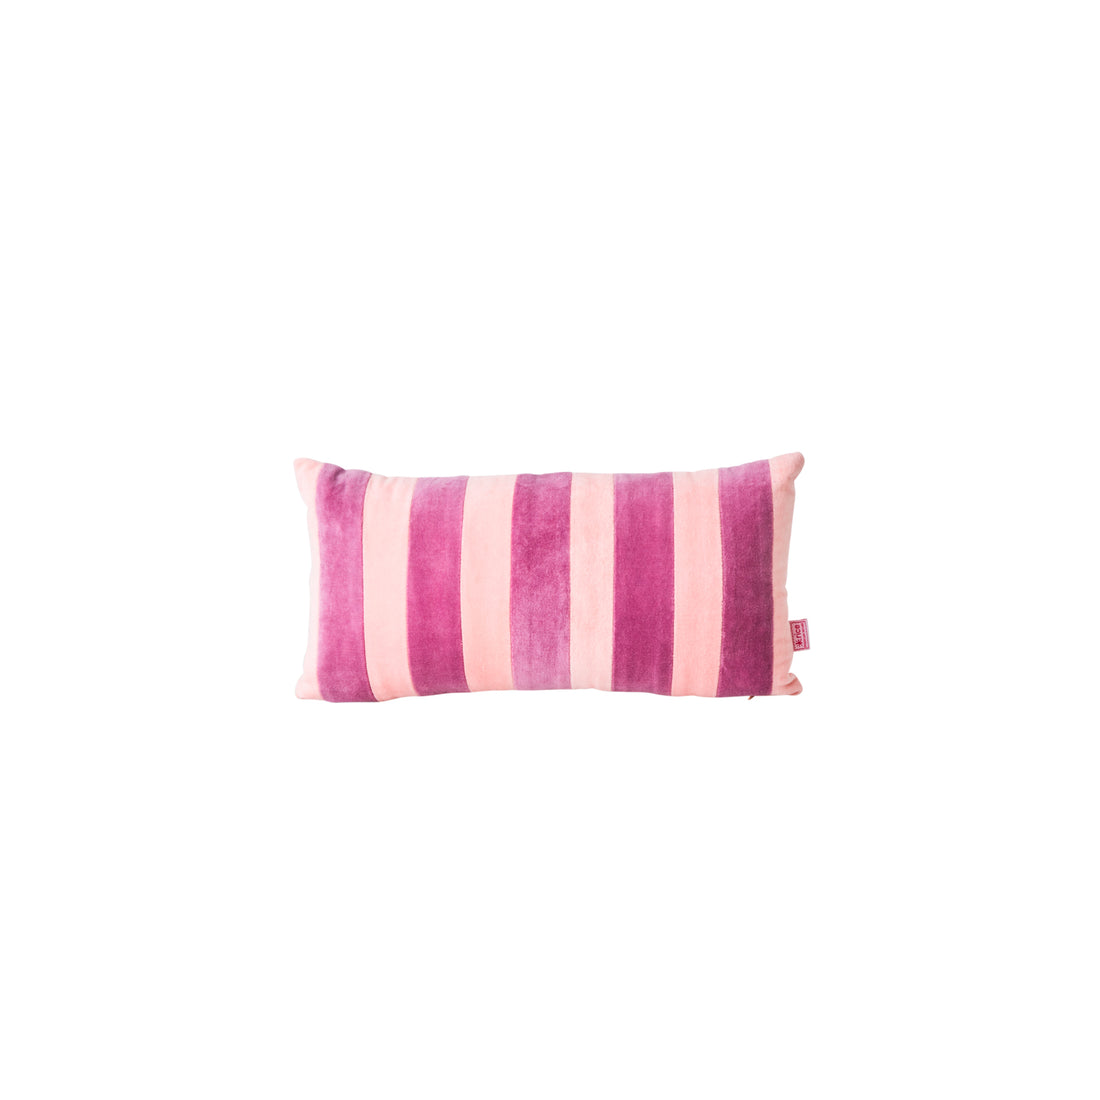 rice-dk-rectangular-velvet-pillow-with-pink-and-purple-stripes-small-pink-purple-rice-csrec-sstrip-